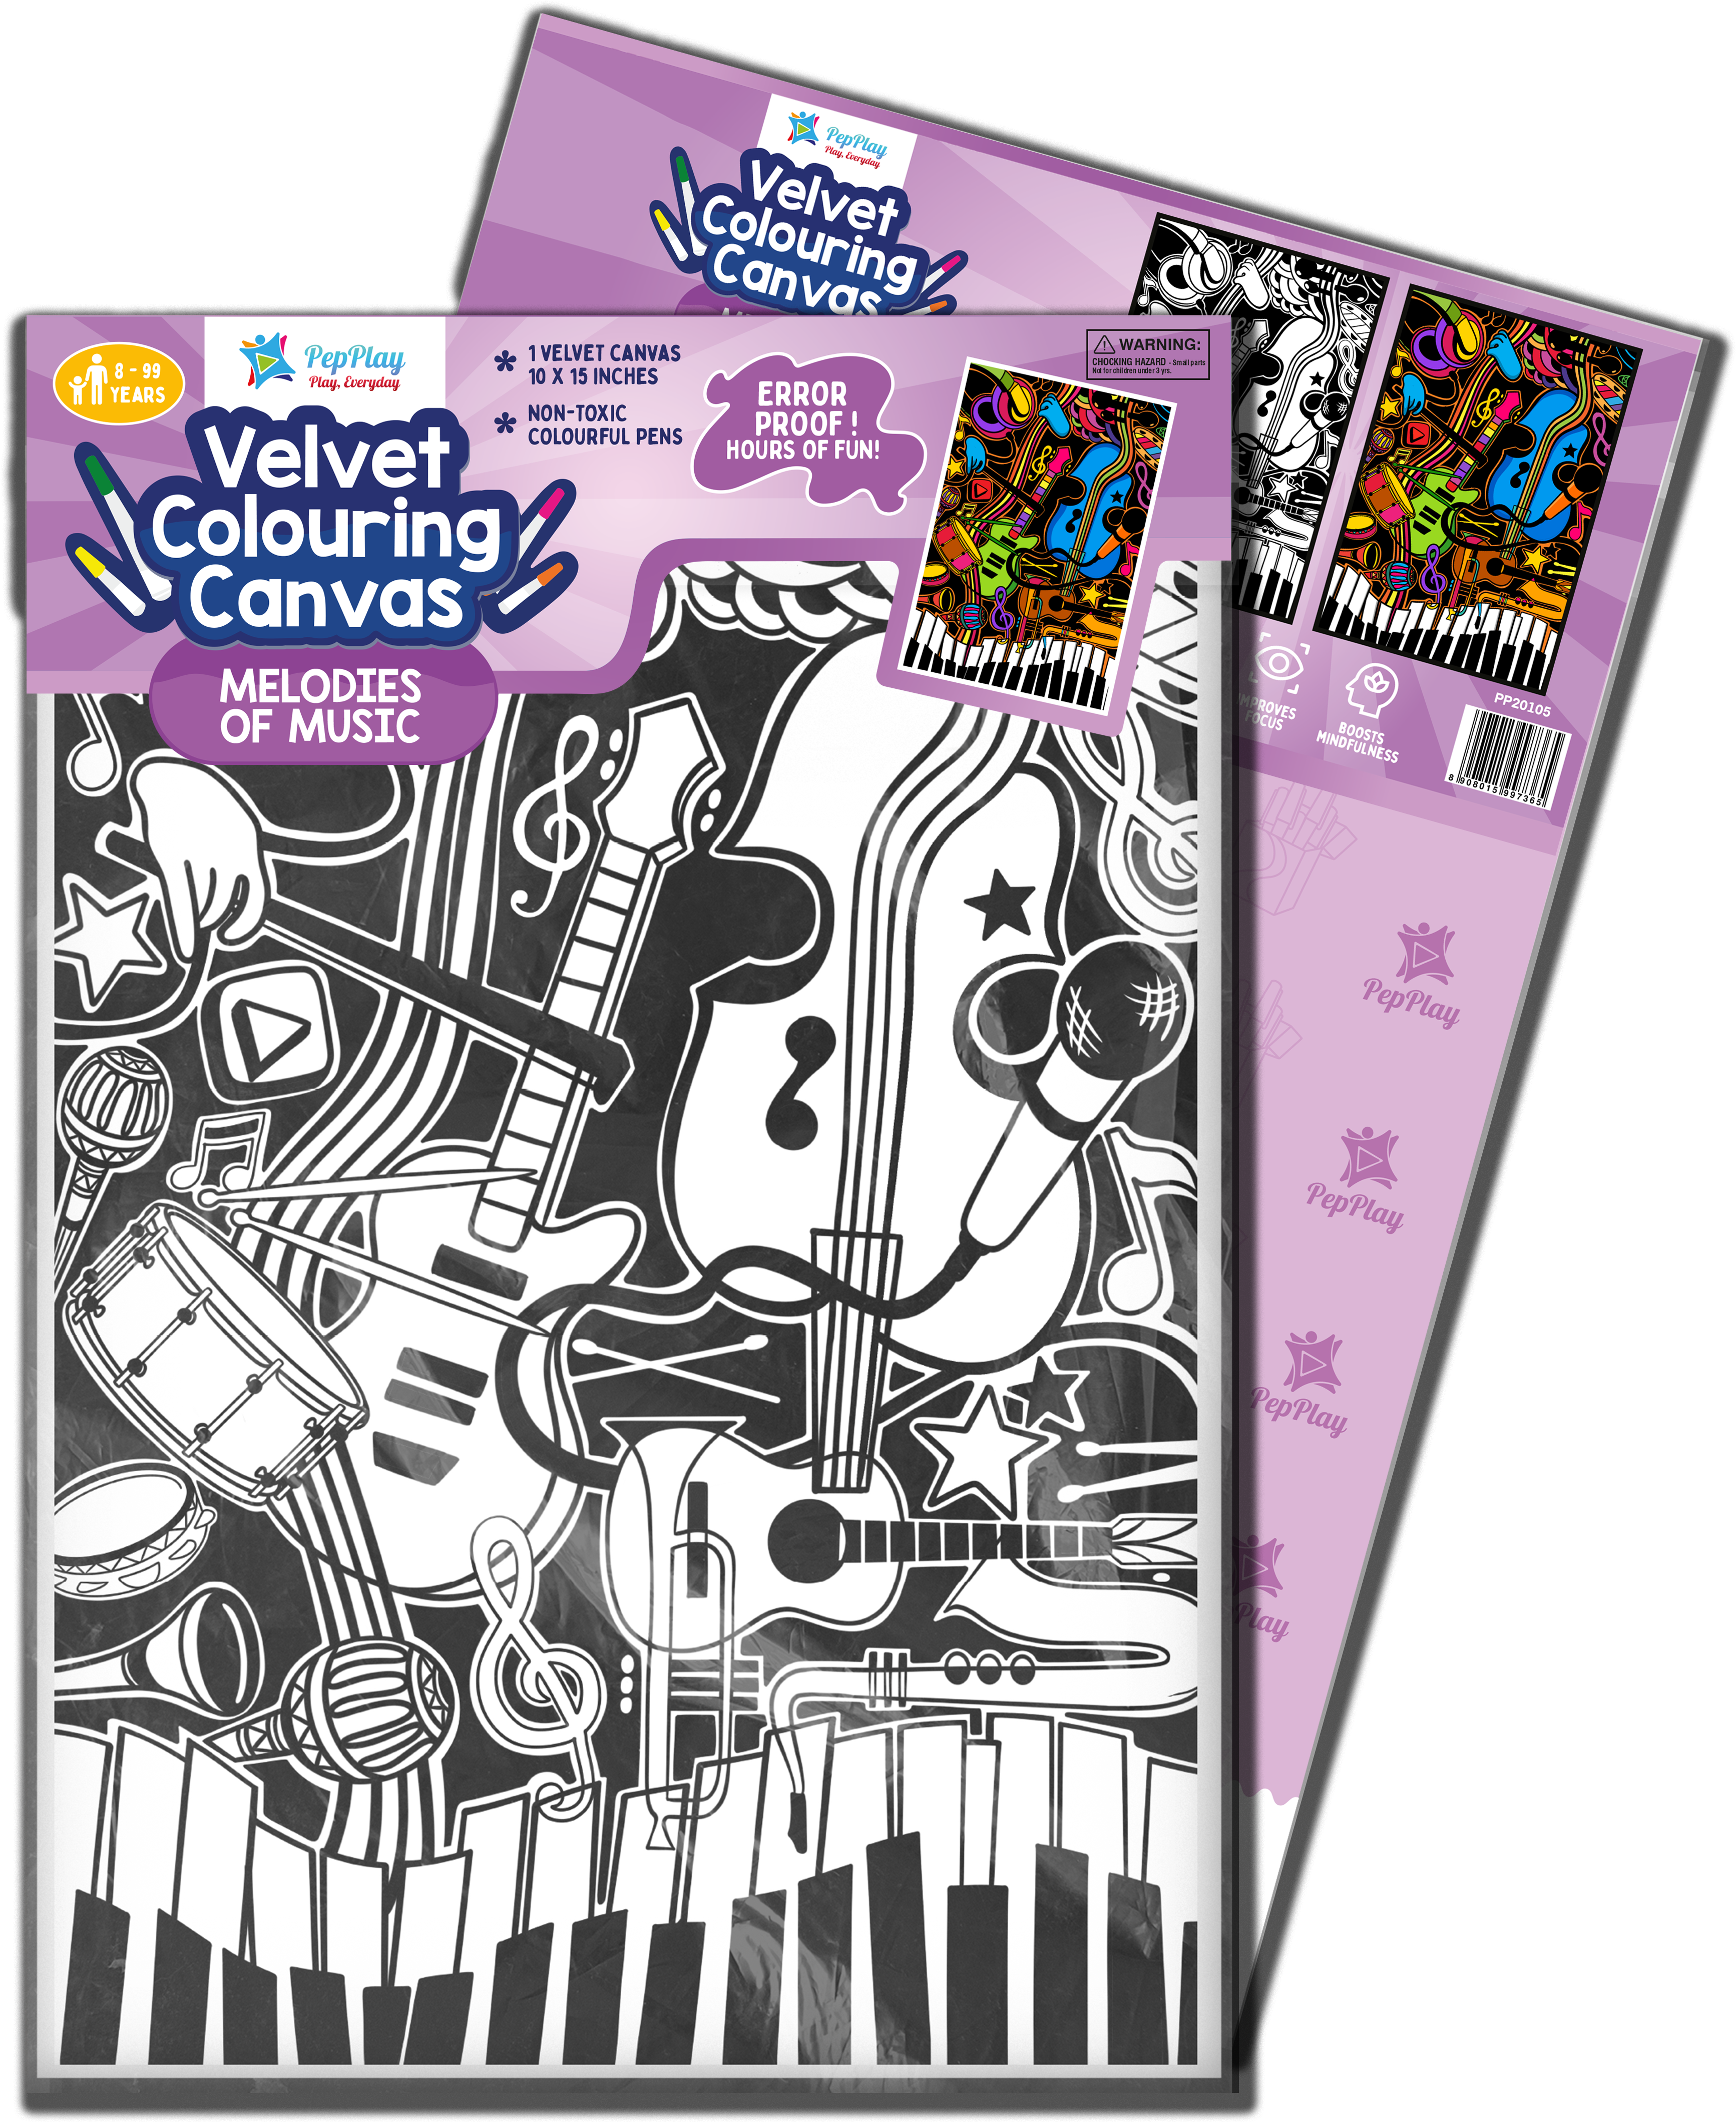 Pepplay Velvet Colouring Posters - Melodies Of Music